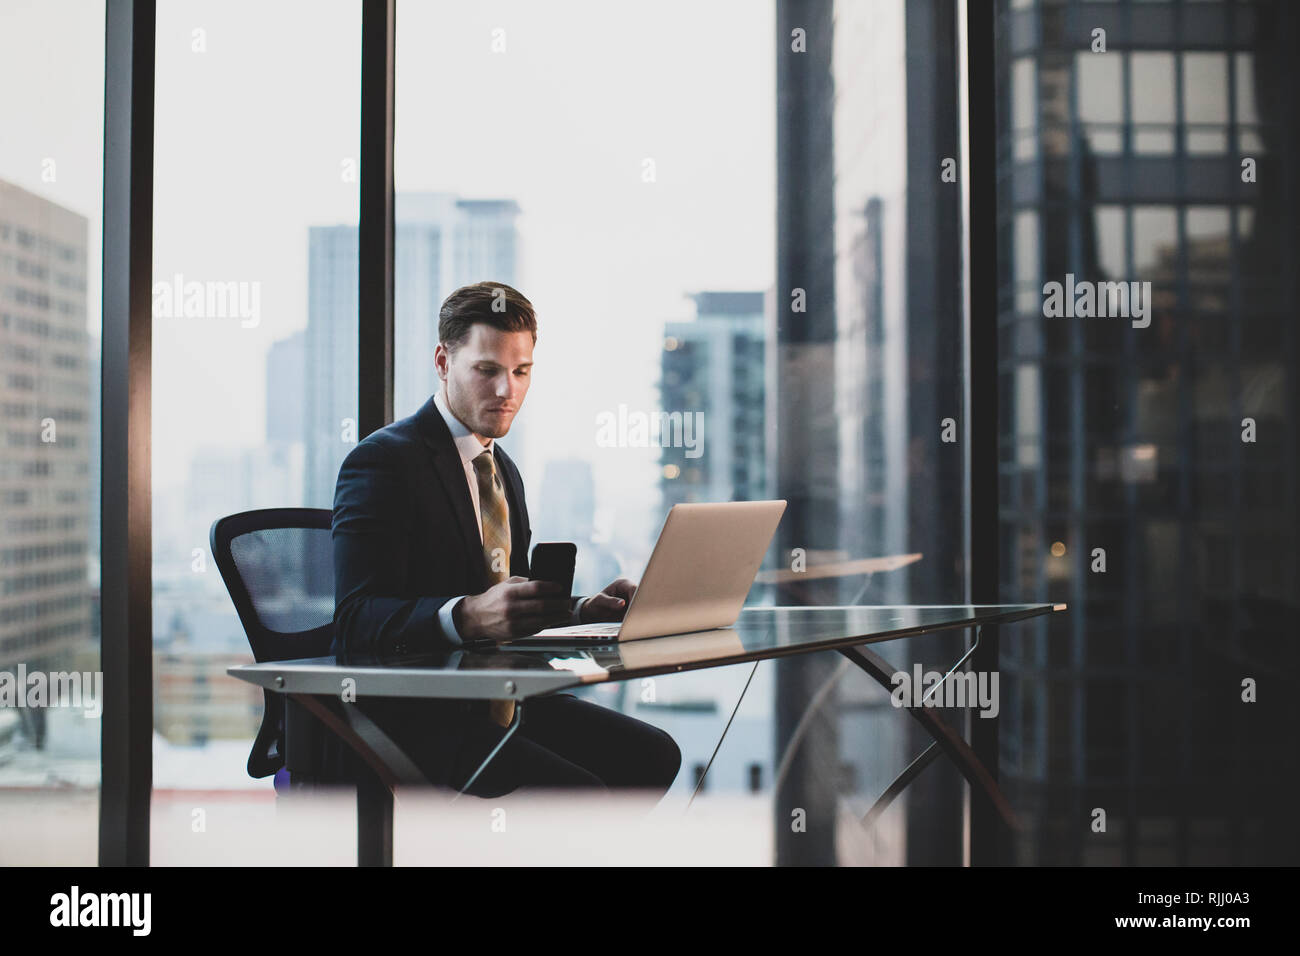 Businessman working in executive office in a skyscraper Stock Photo